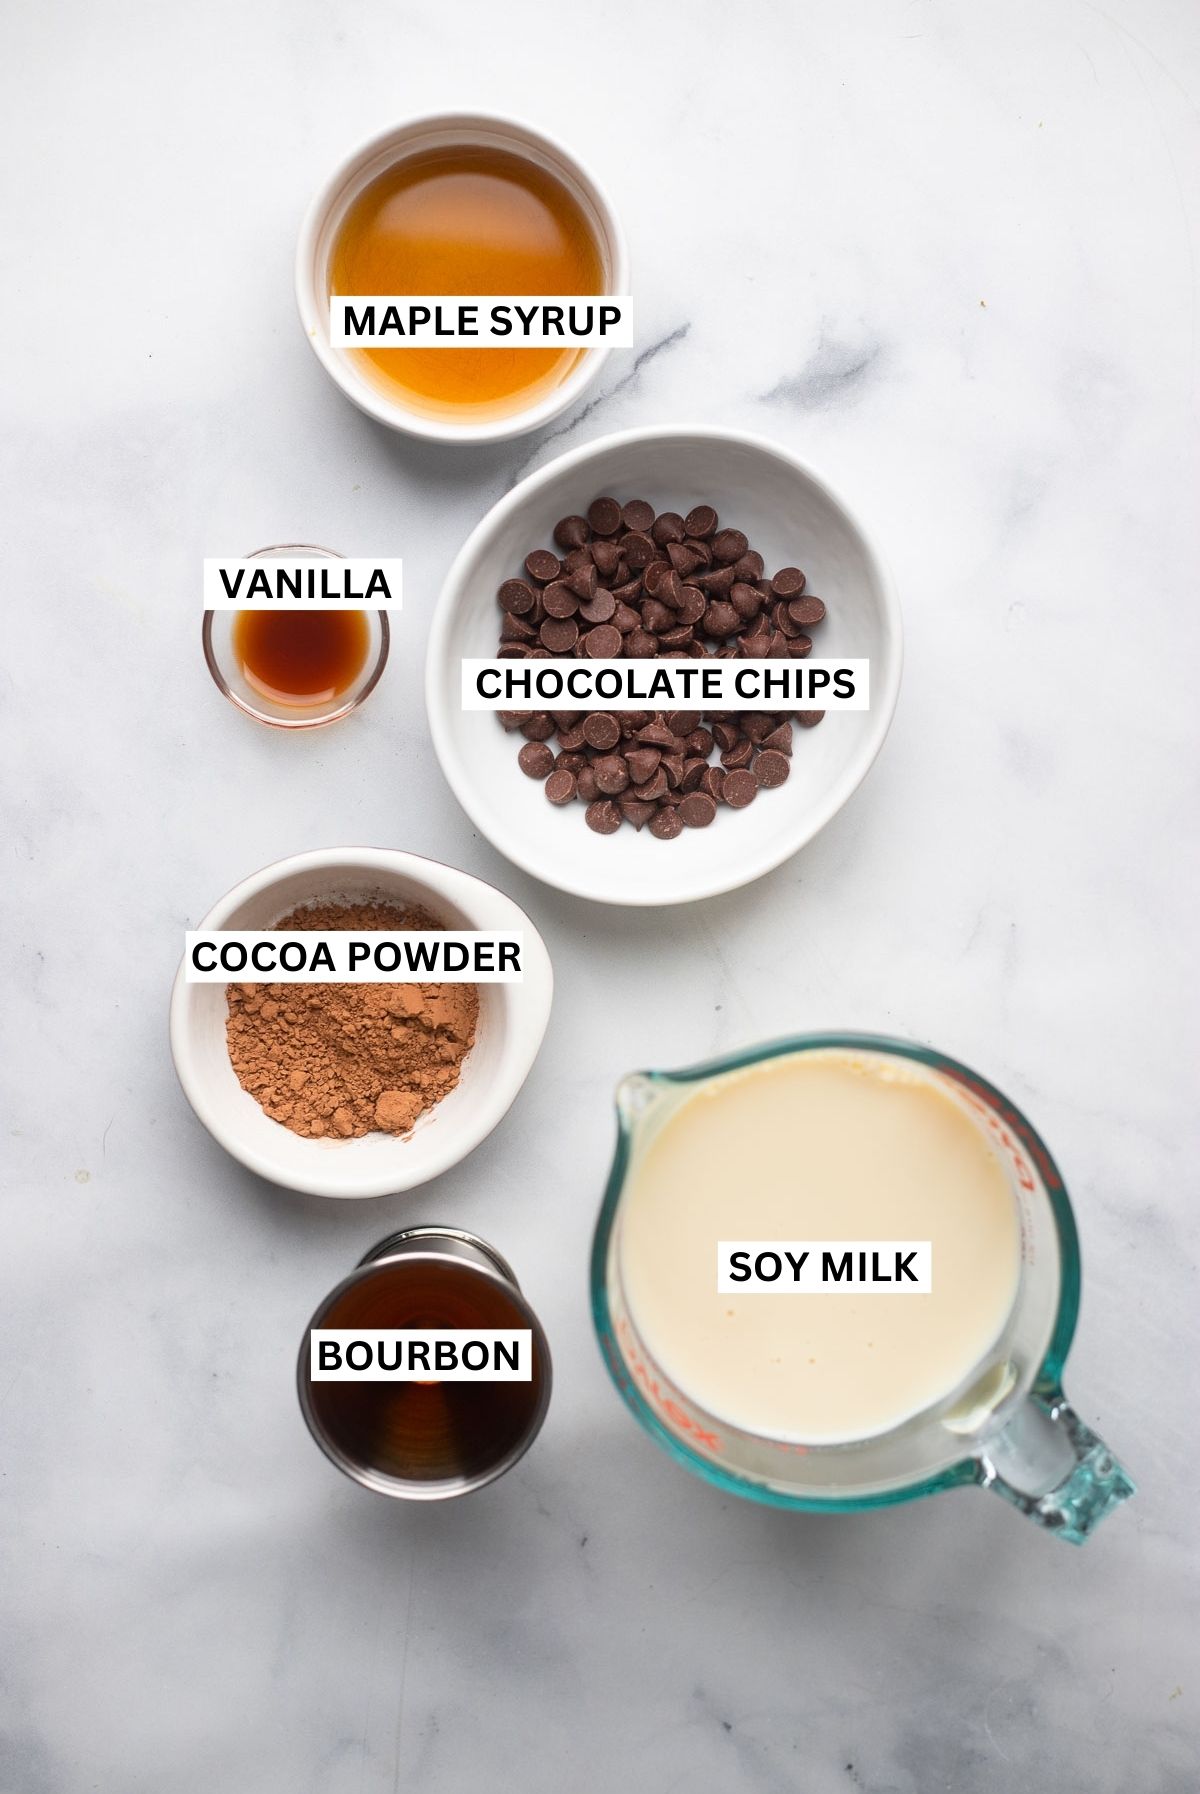 spiked hot chocolate ingredients in small bowls with labels.